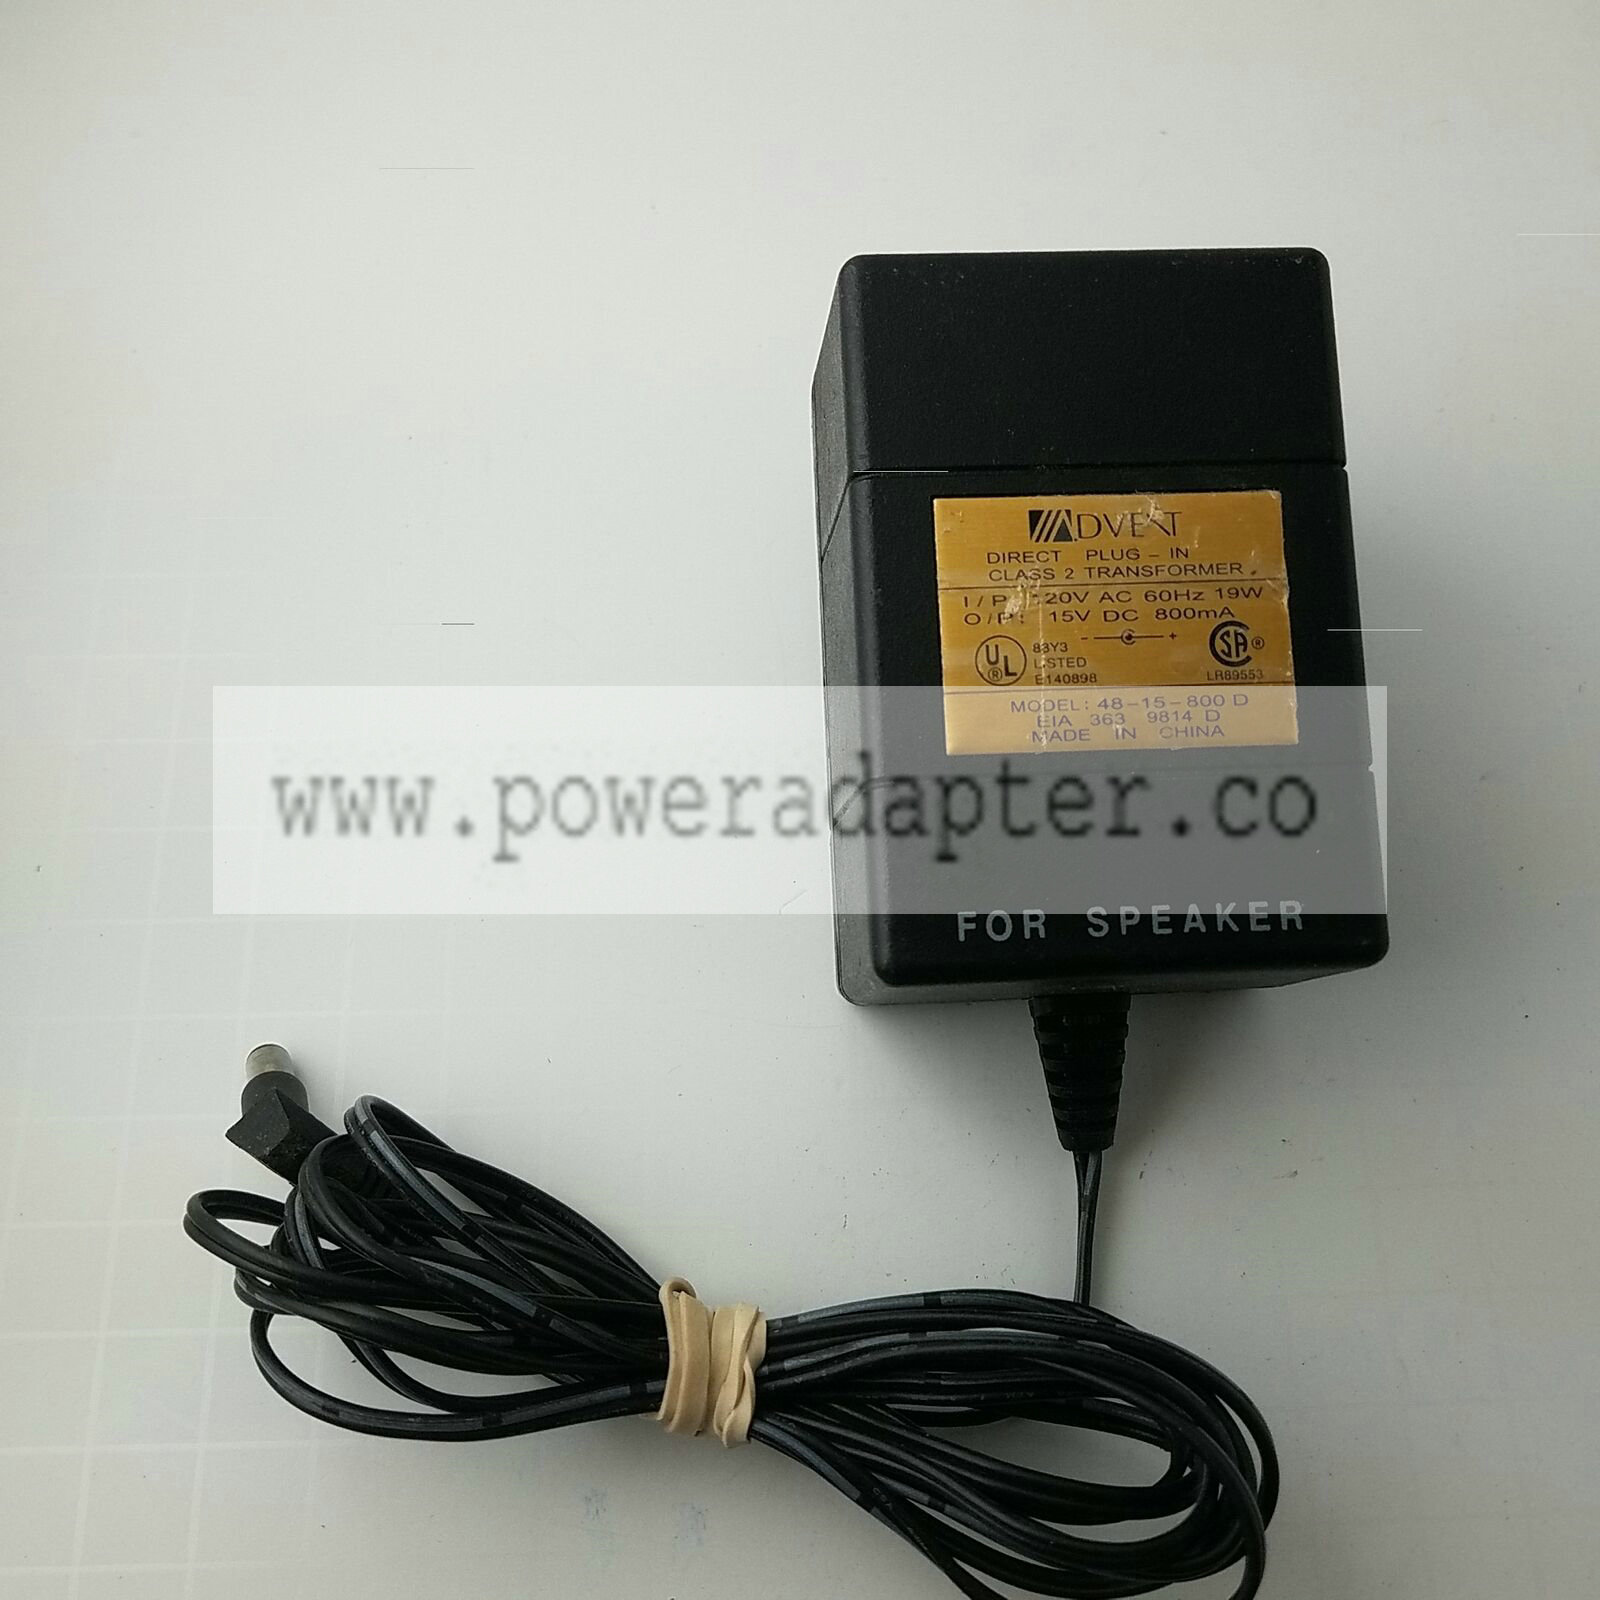 Advent Model 48-15-800D AC Adapter Power Output 15VDC 800mA Brand: Advent MPN: 48-15-800D Model: 48-15-800D Outpu